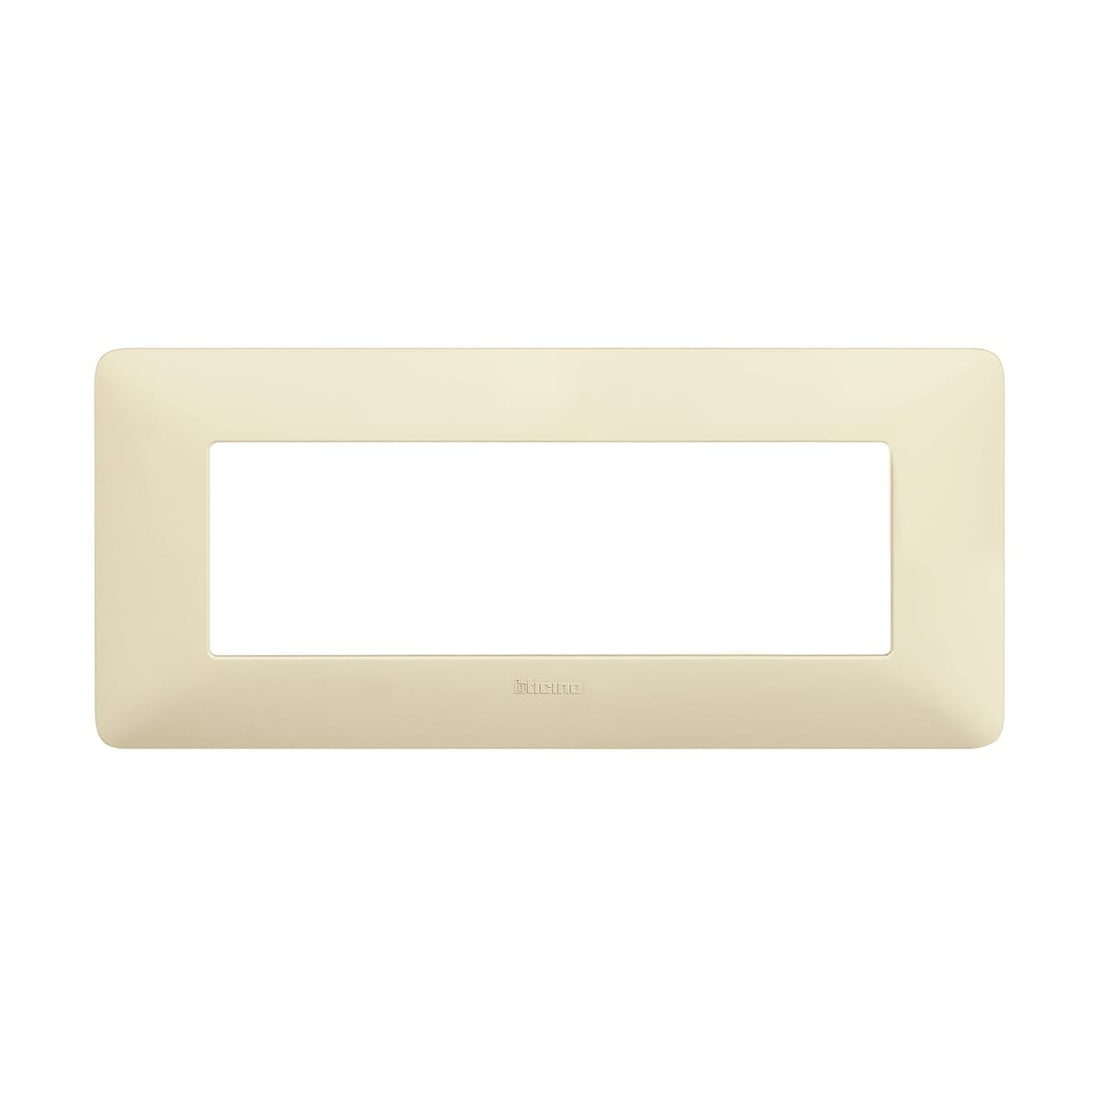 MATIX PLATE 6 PLACES IVORY